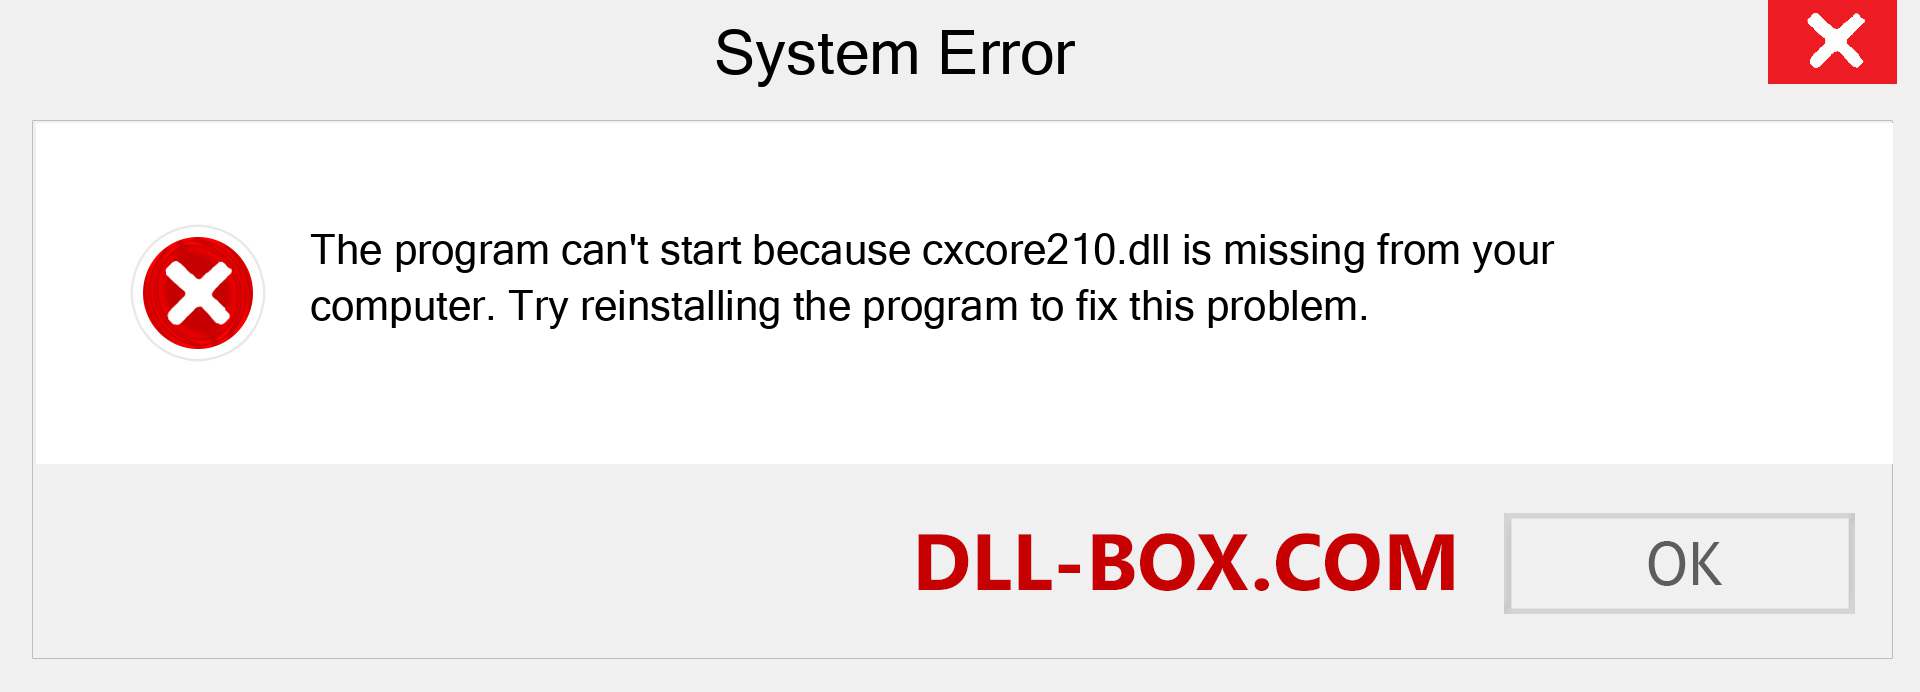  cxcore210.dll file is missing?. Download for Windows 7, 8, 10 - Fix  cxcore210 dll Missing Error on Windows, photos, images